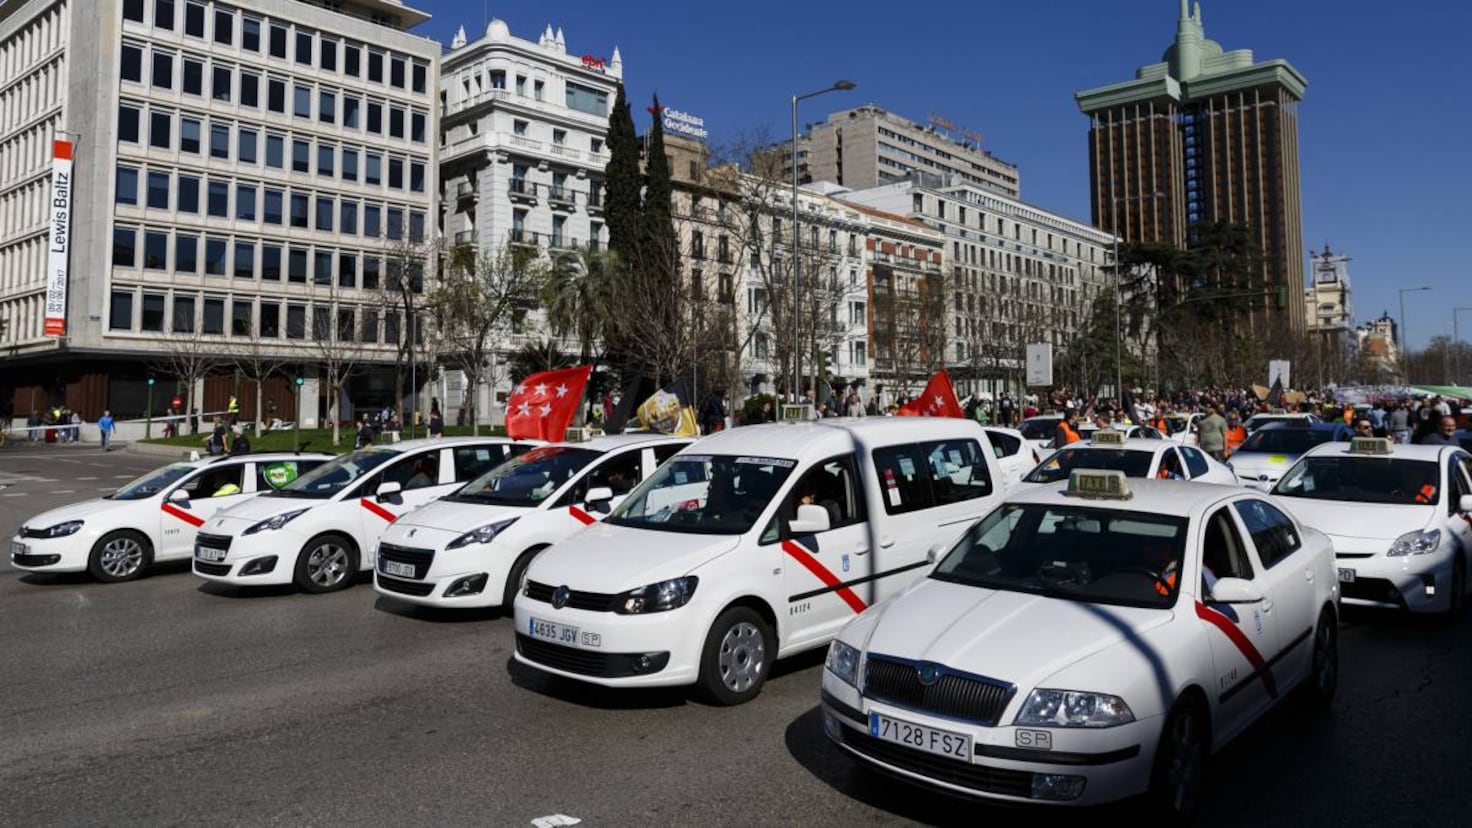 The reason why Madrid taxis are white and have a red line on the door